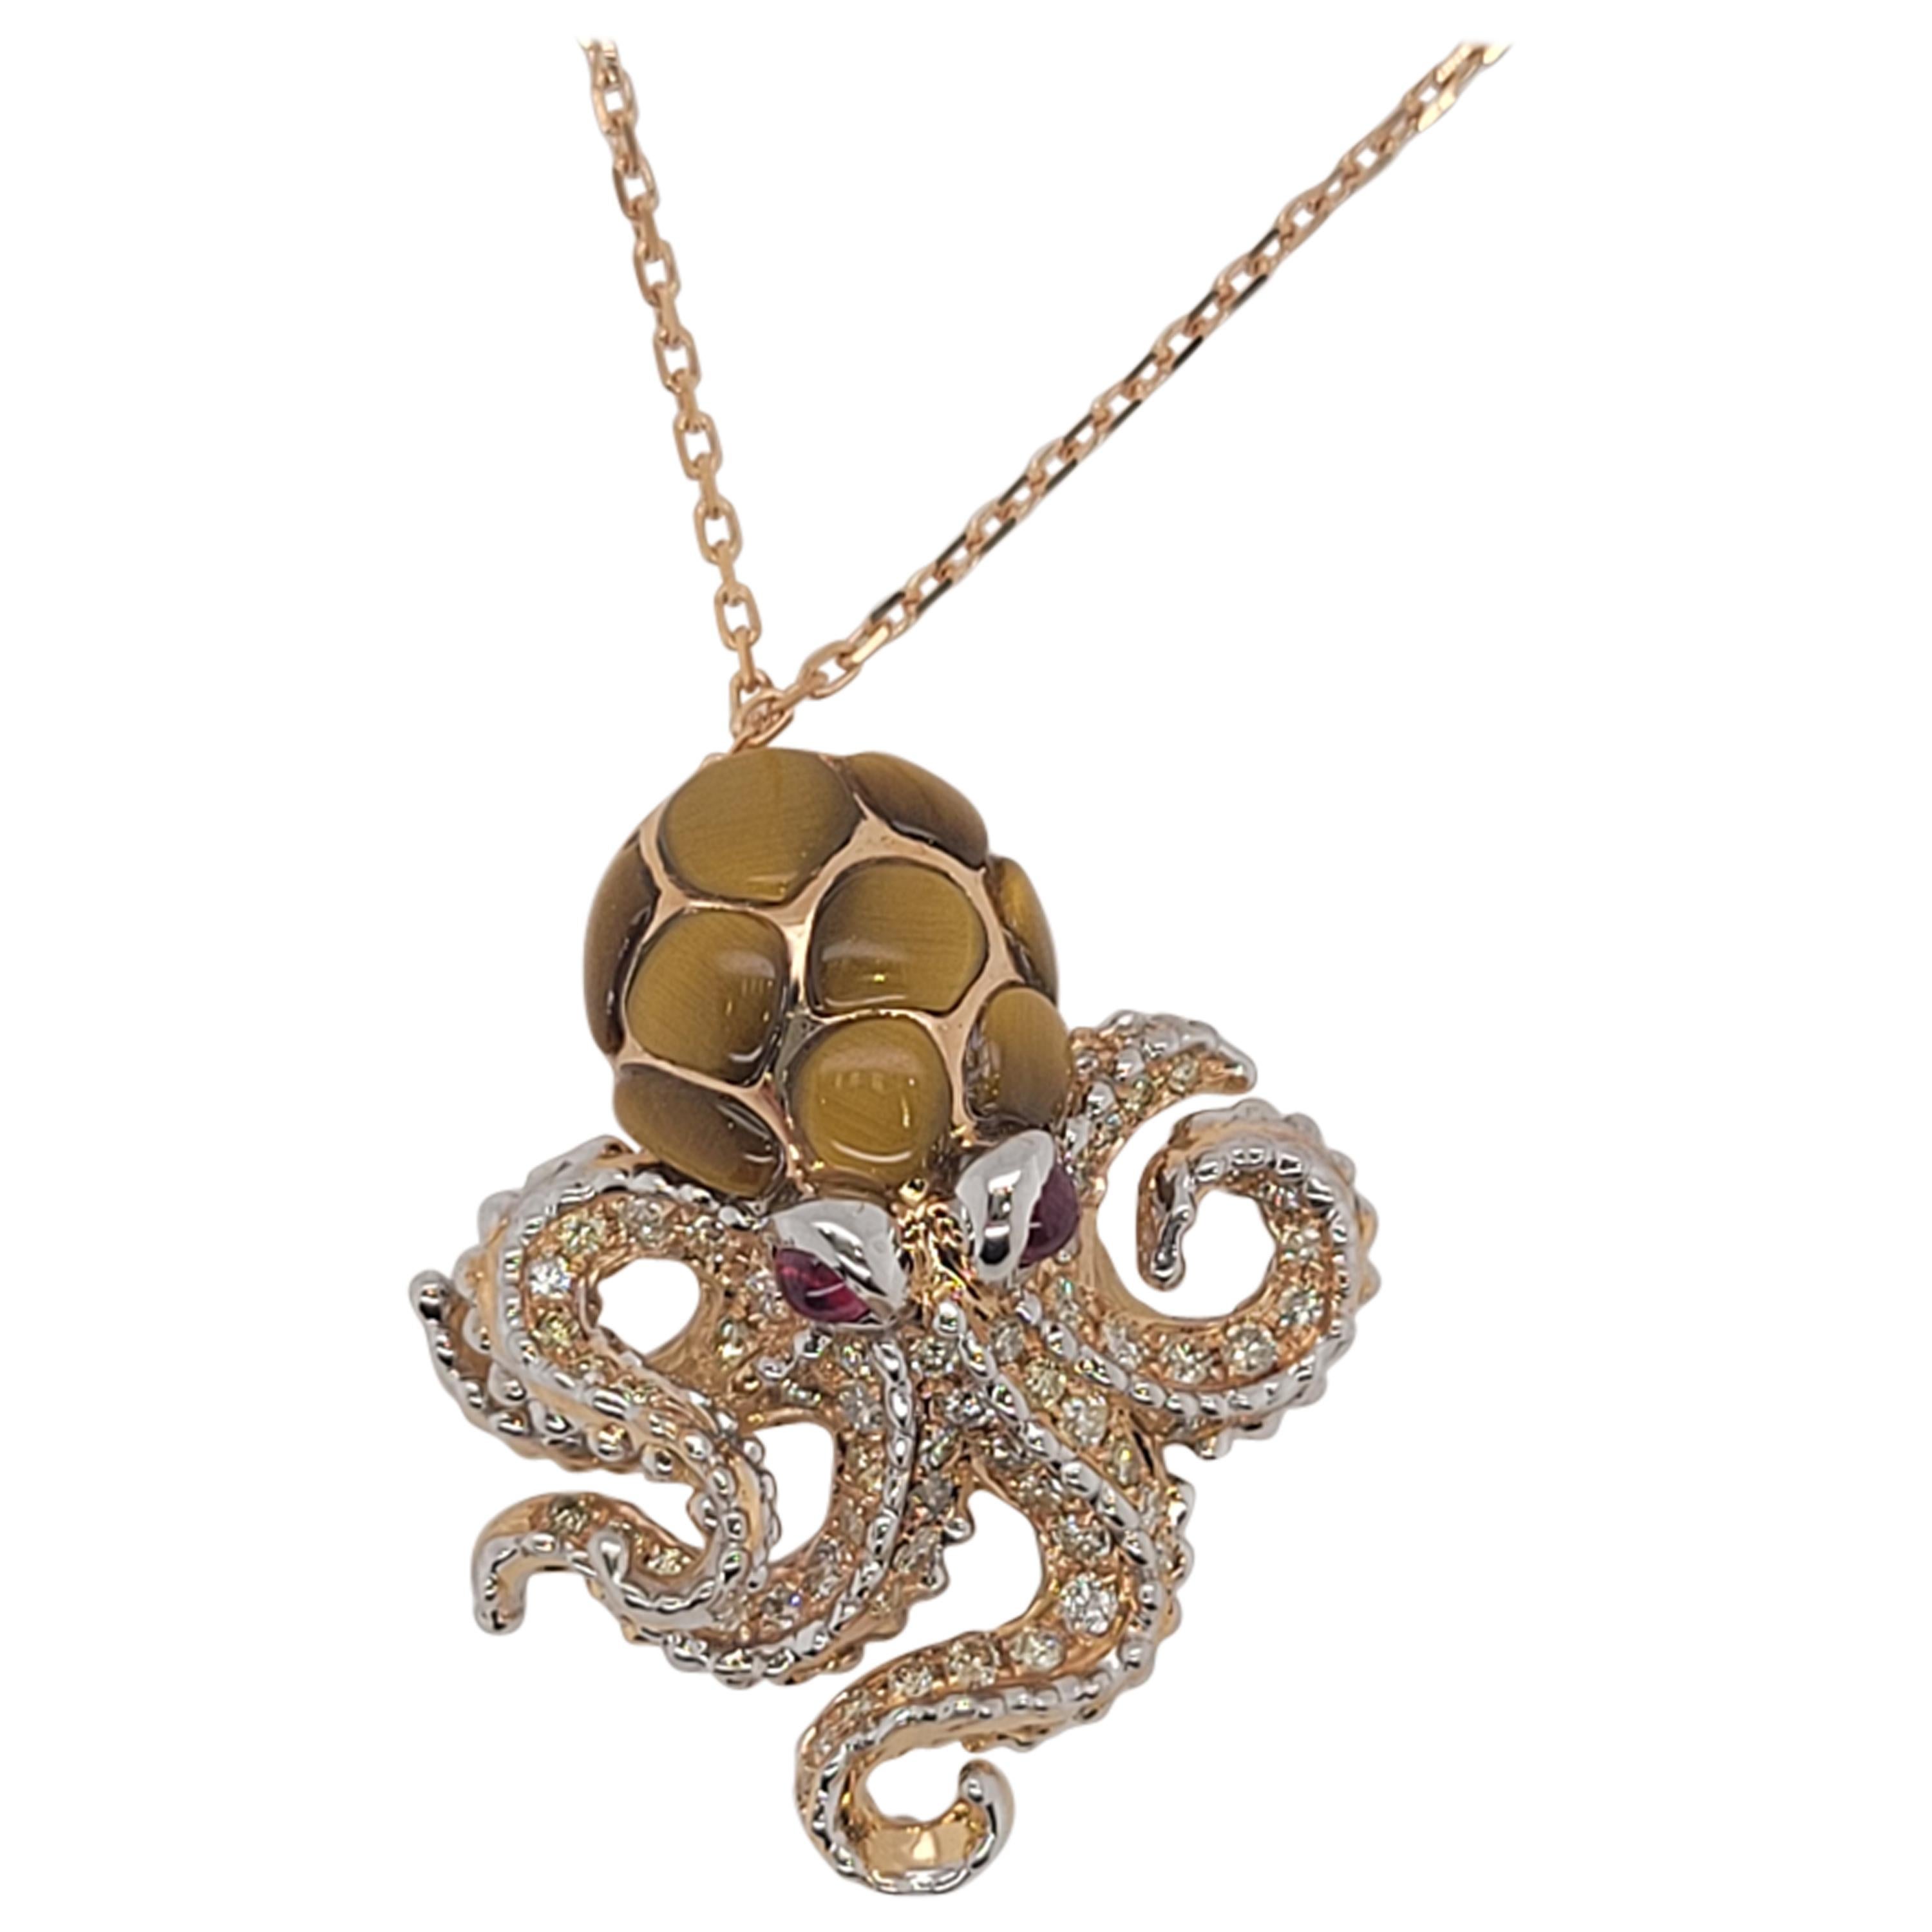 Octopus Pendant in 18K Gold Tiger's Eye, Ruby and Diamonds